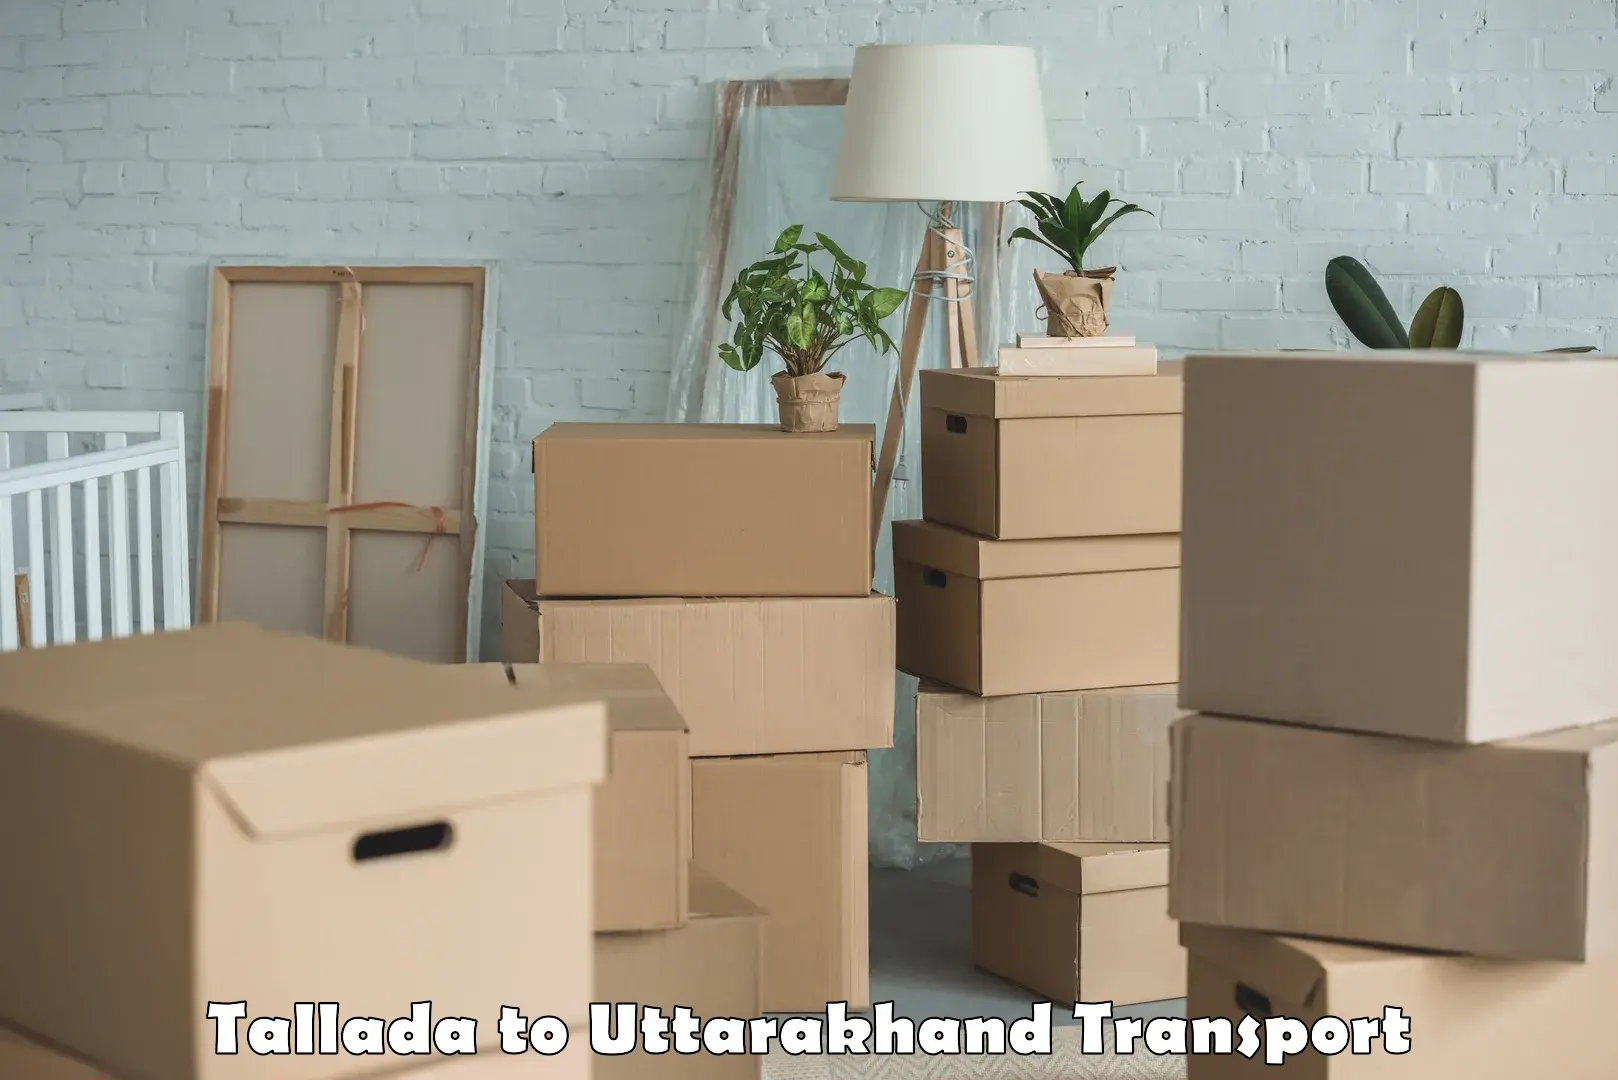 Daily parcel service transport in Tallada to Rishikesh